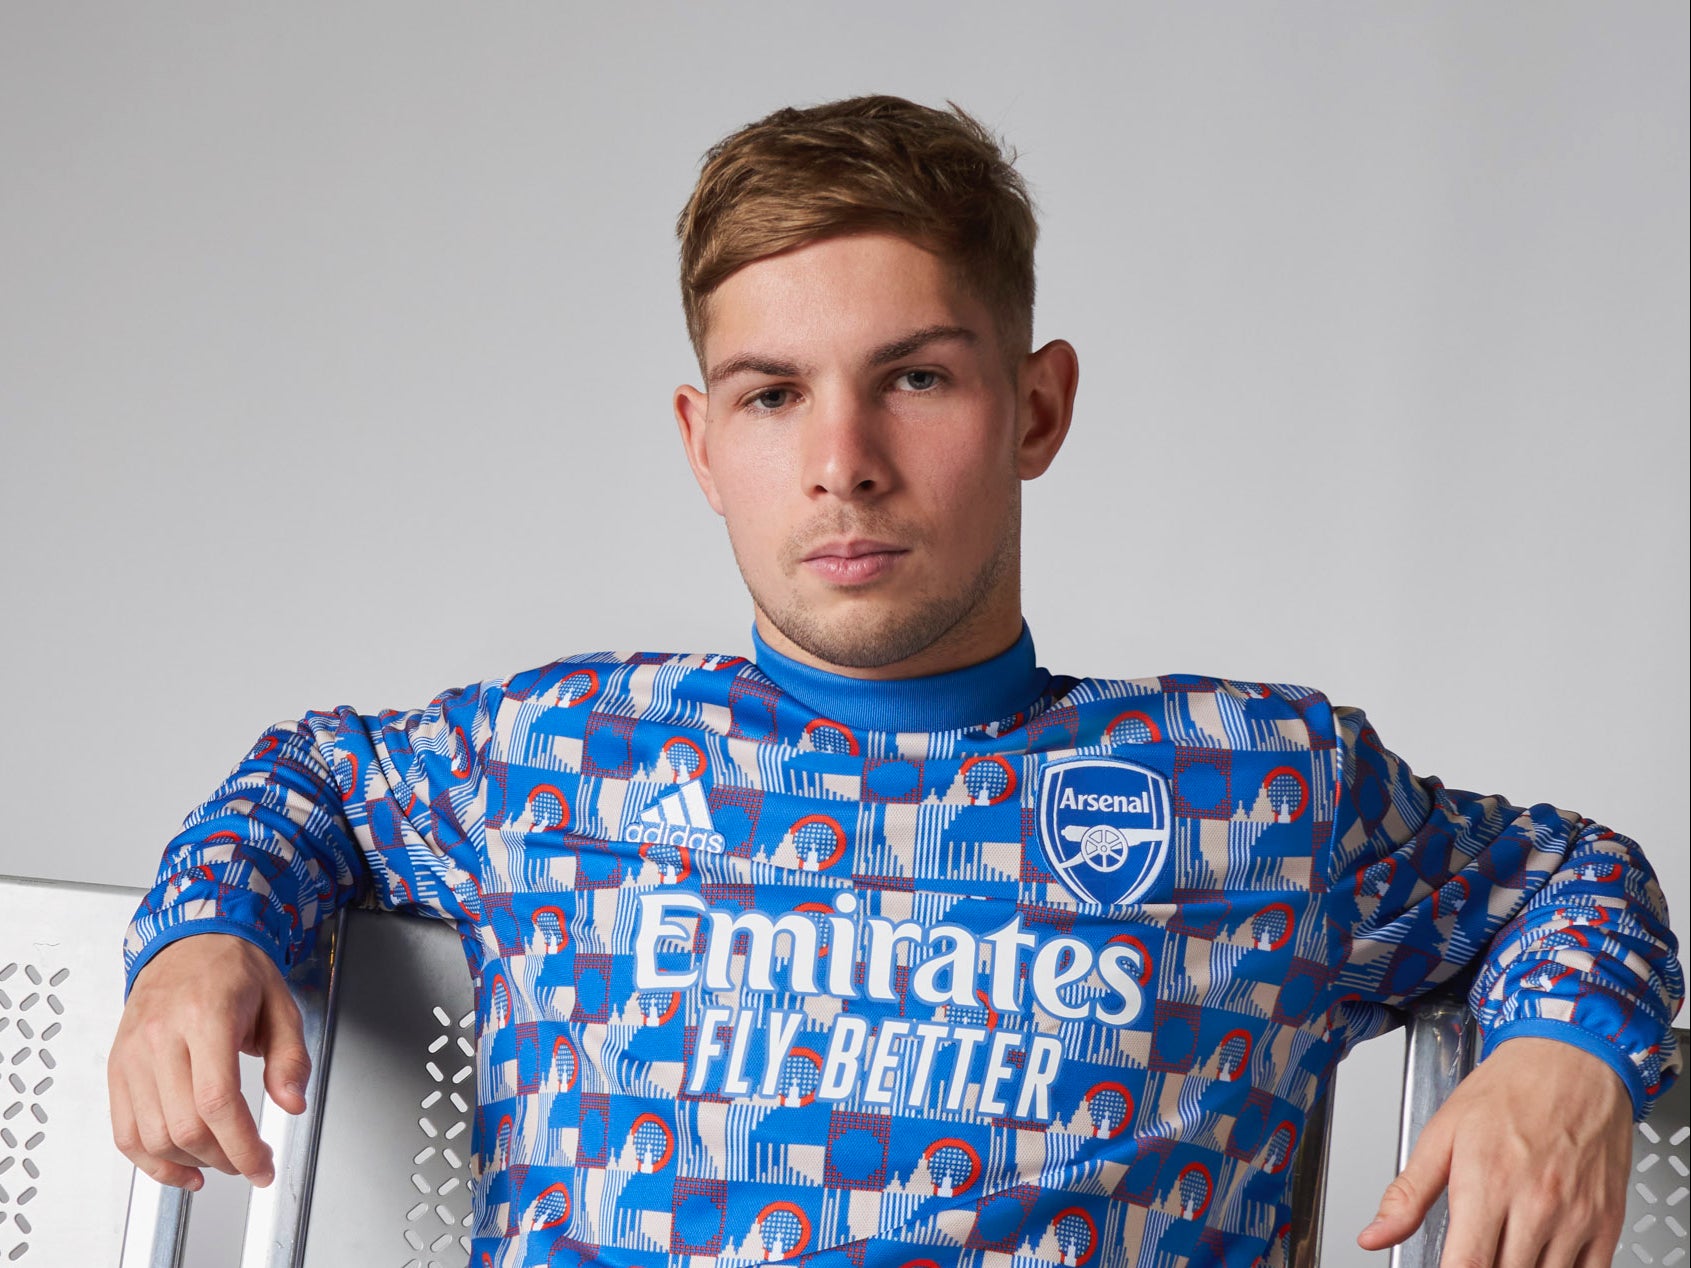 Arsenal launch new kit inspired by train seats | The Independent